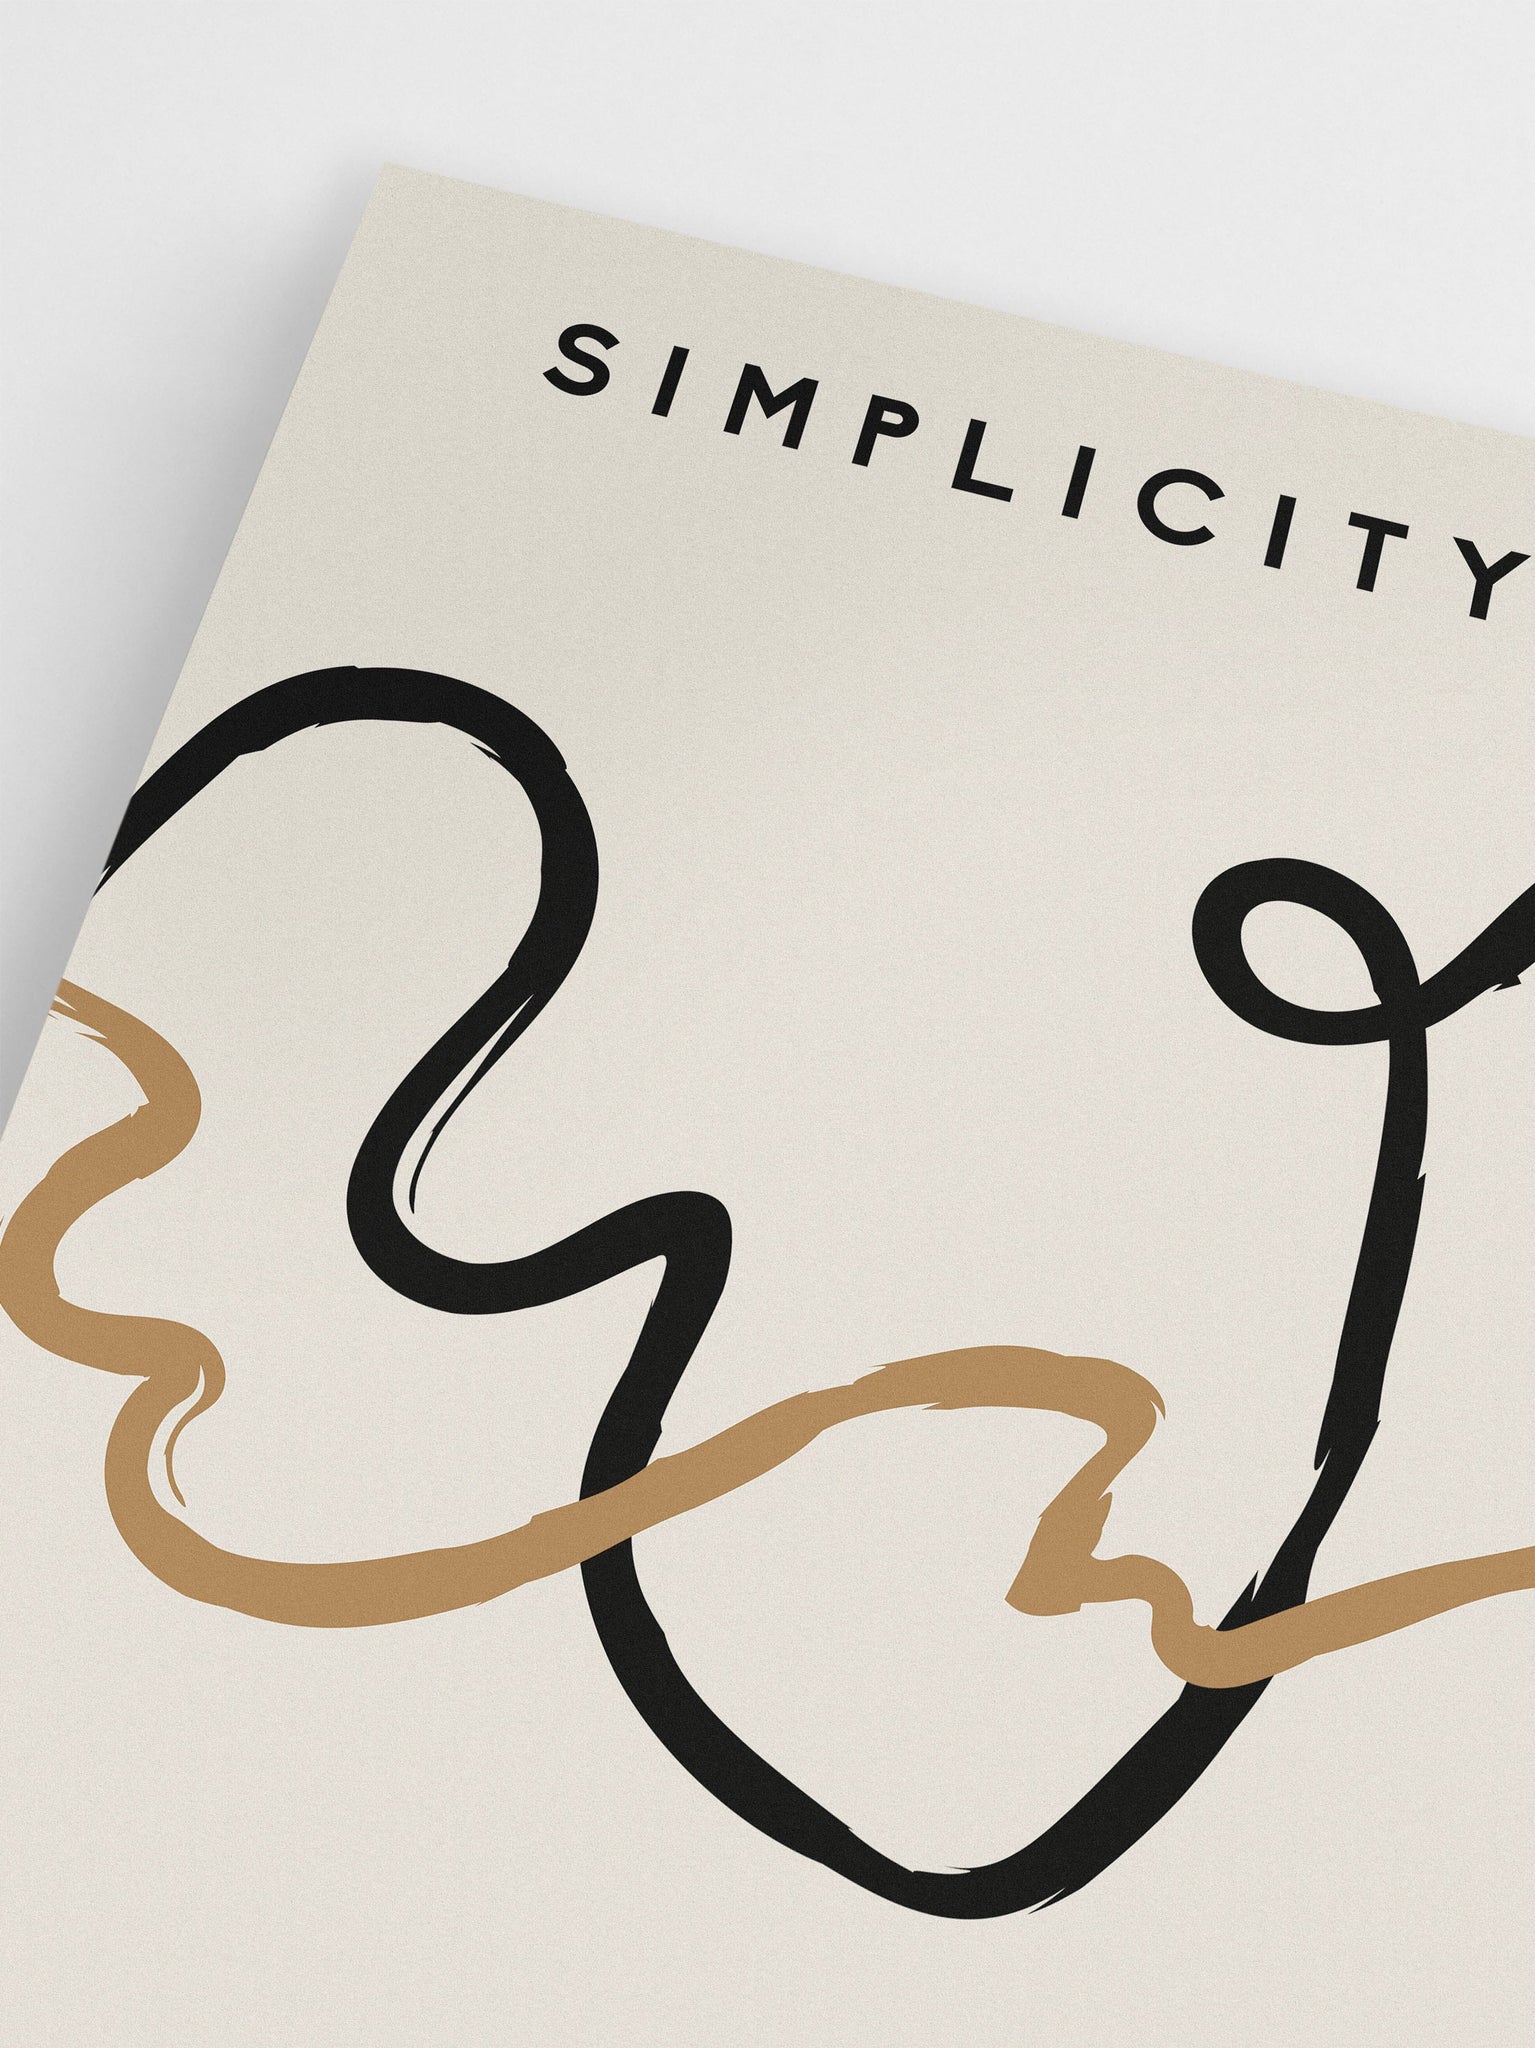 Simplicity Squiggle Lines Poster